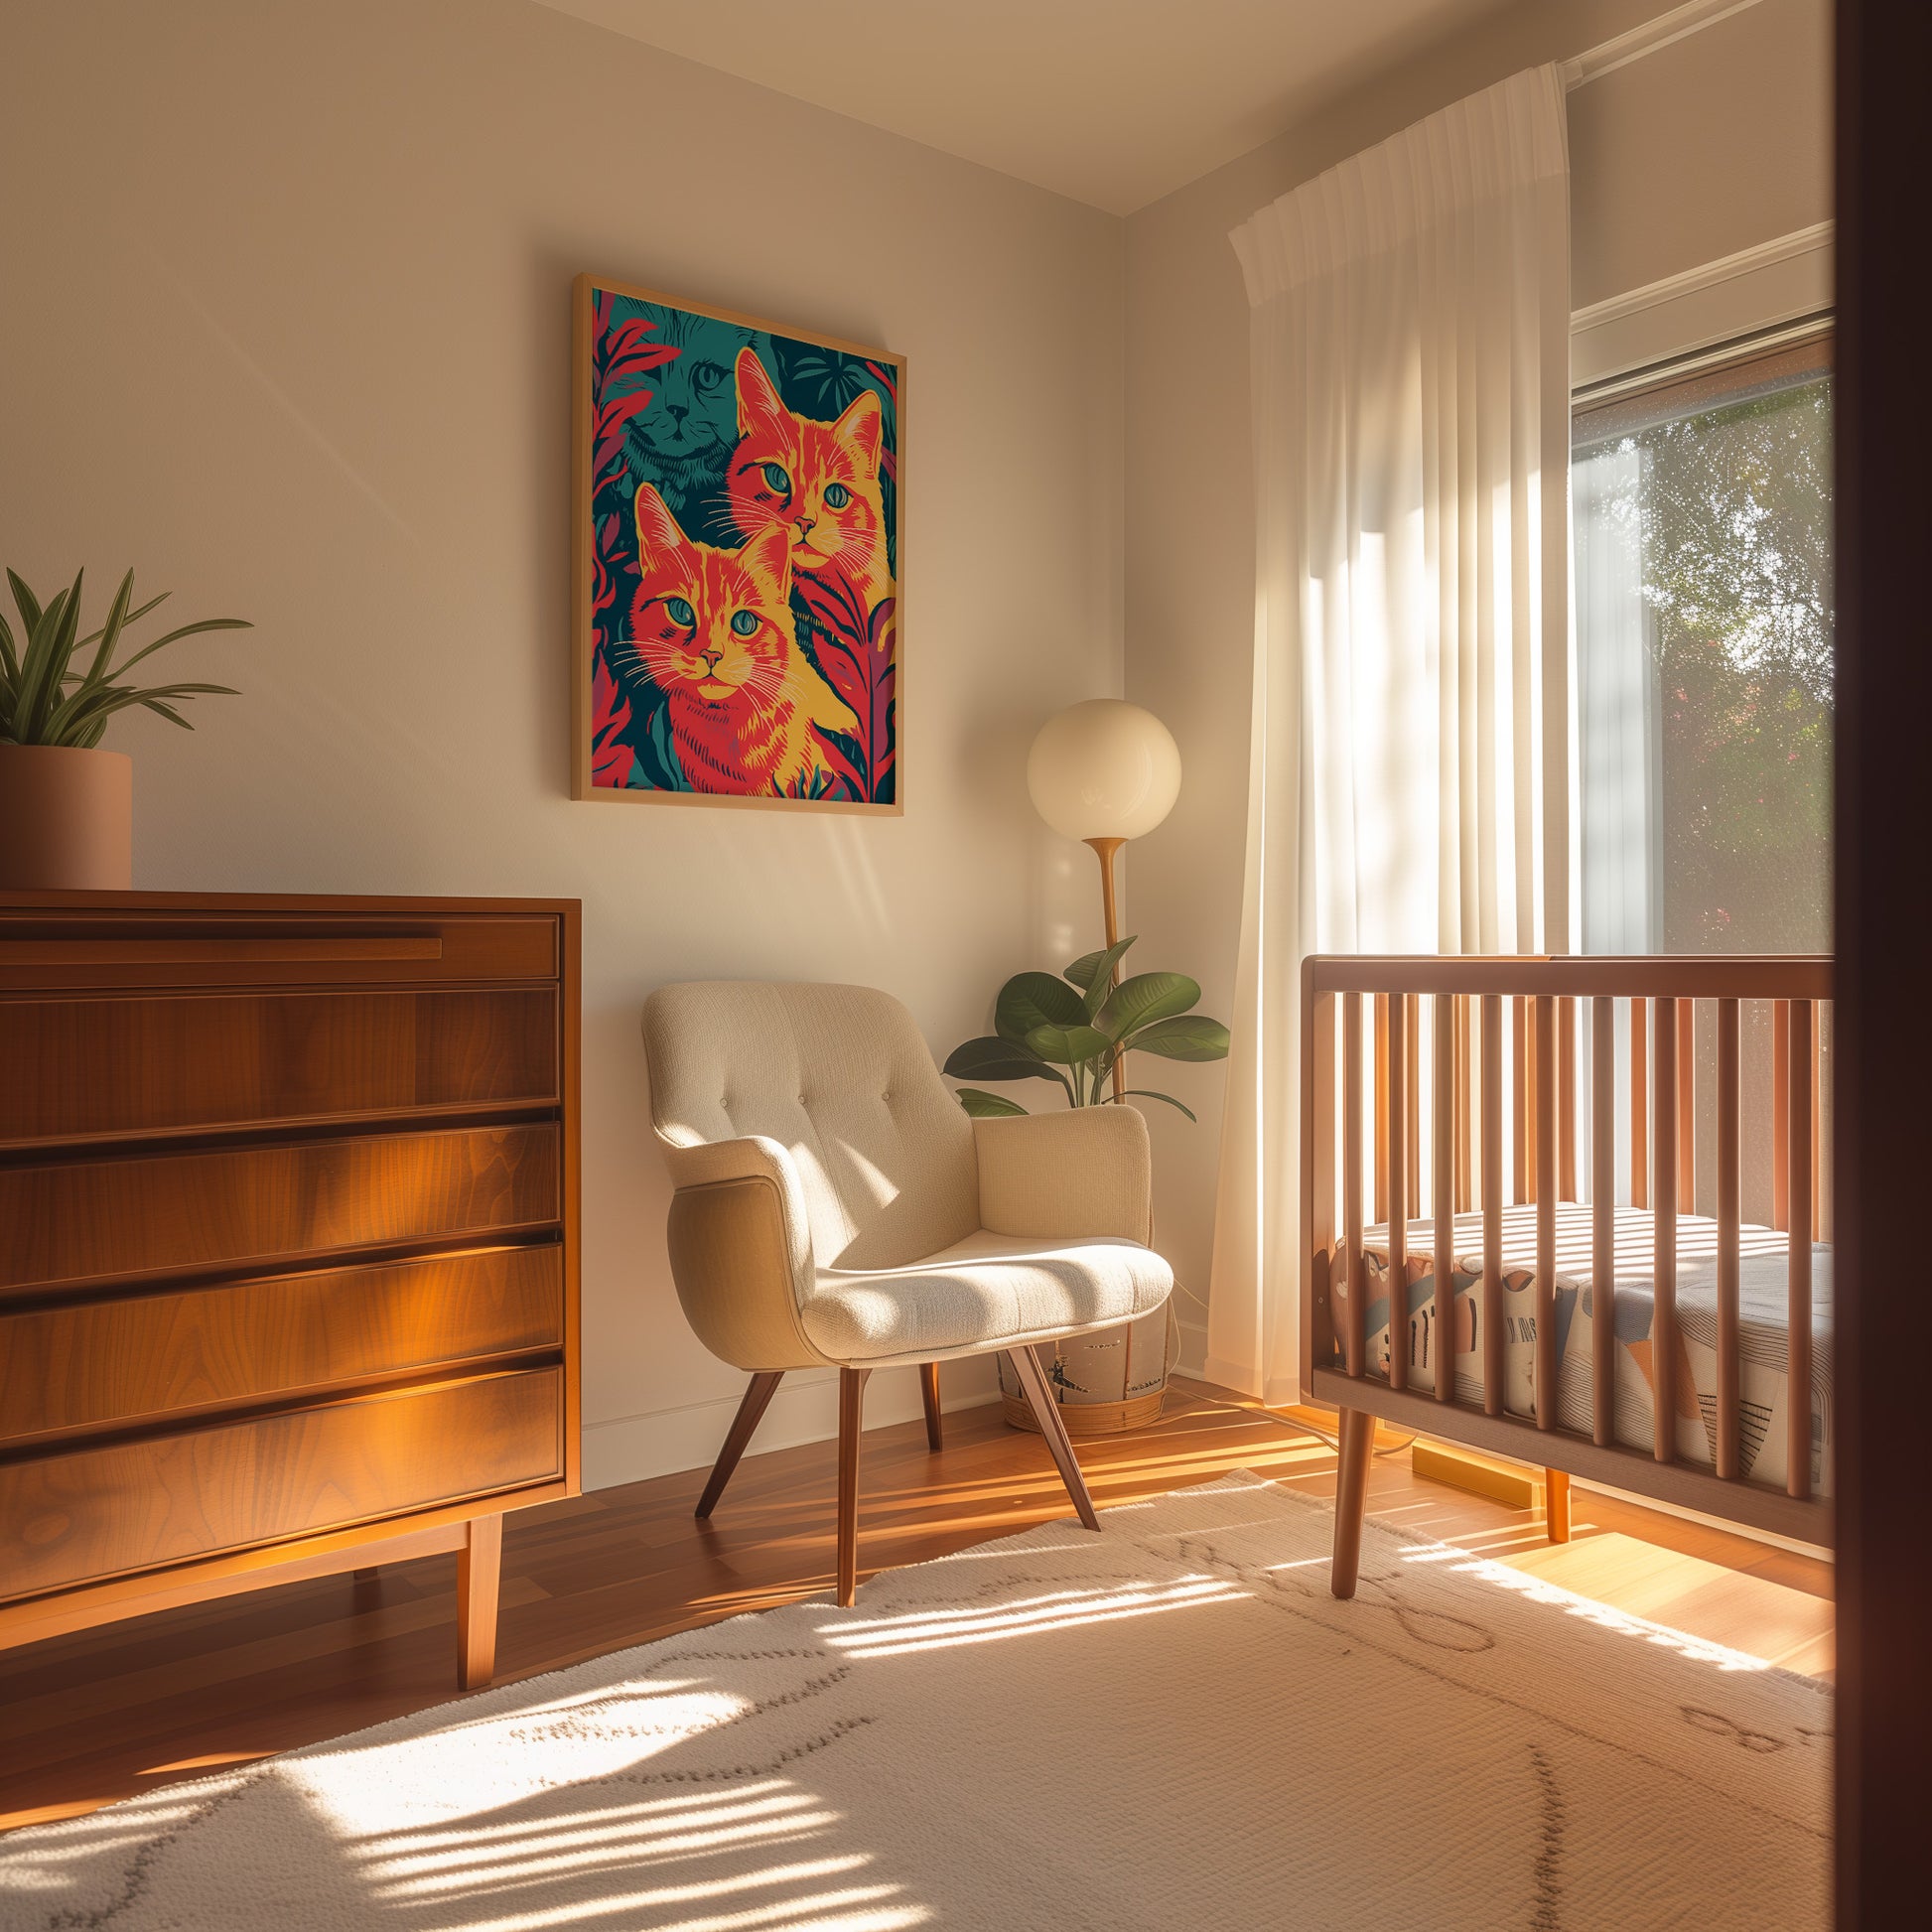 Sunlit nursery room with a crib, armchair, and colorful cat painting on the wall.